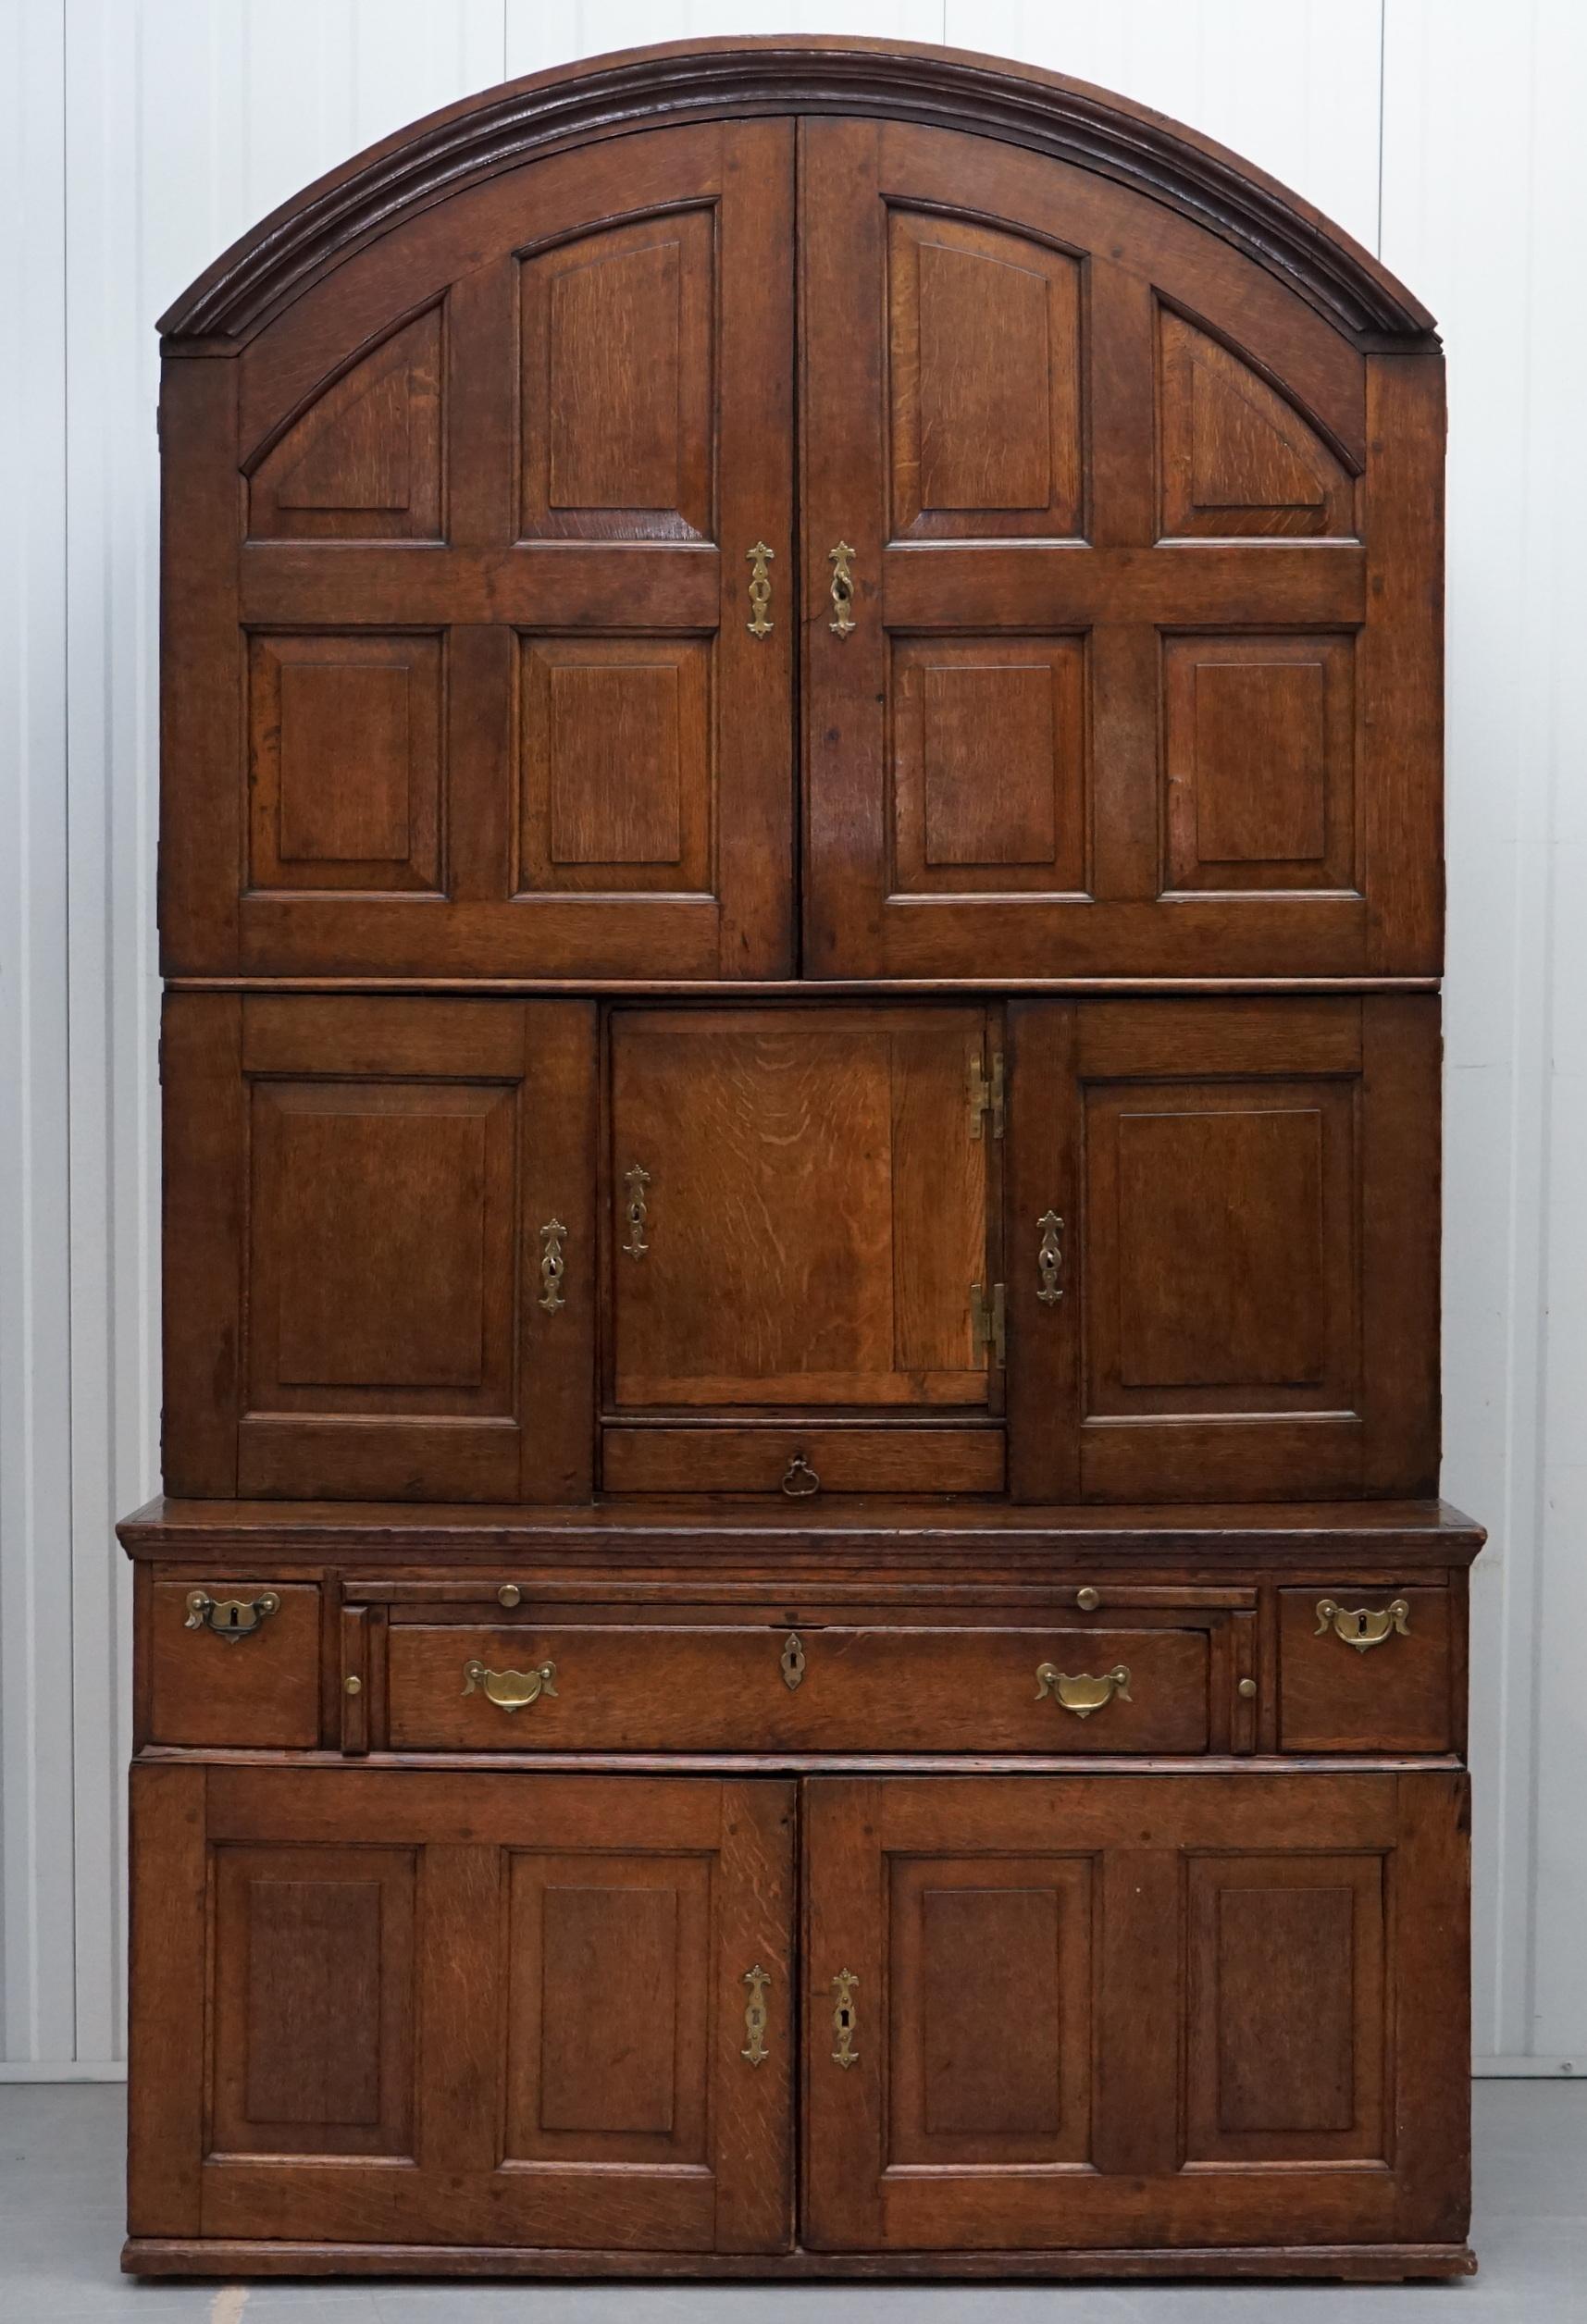 We are delighted to offer for sale this very rare circa 1740 Continental panelled oak arched top cupboard

A very rare find, all original with period fittings, there are some old repairs, timber shrinkage, splits, movement, everything you would